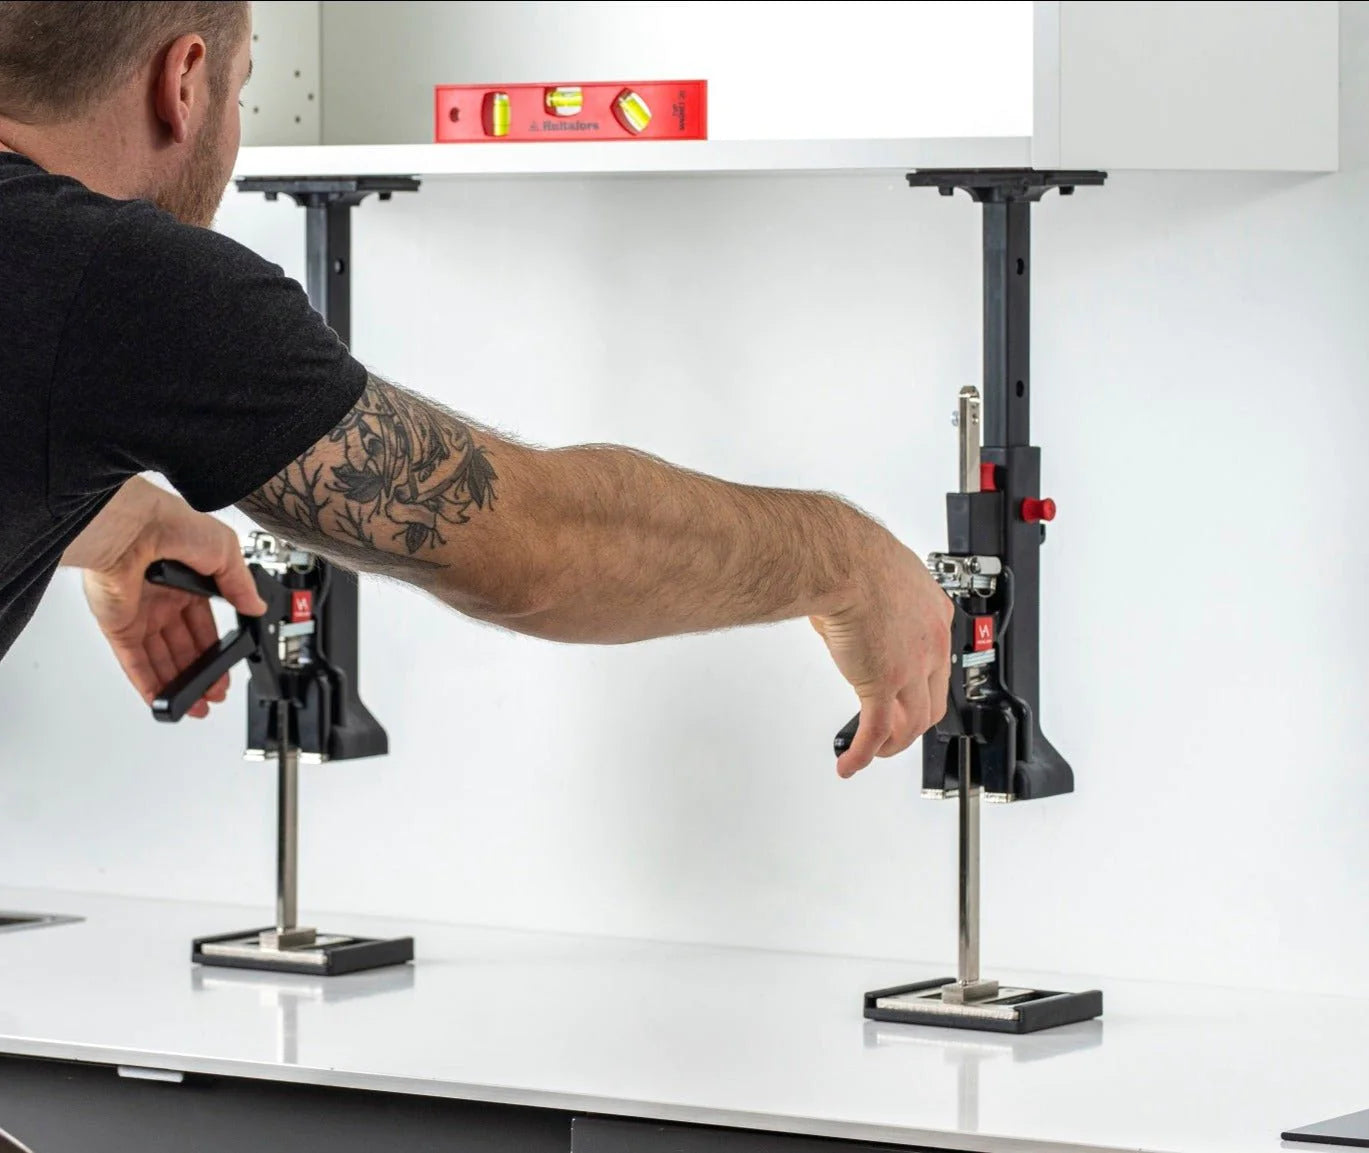 Viking Arm Cabinet Installation Kit | Massca Products